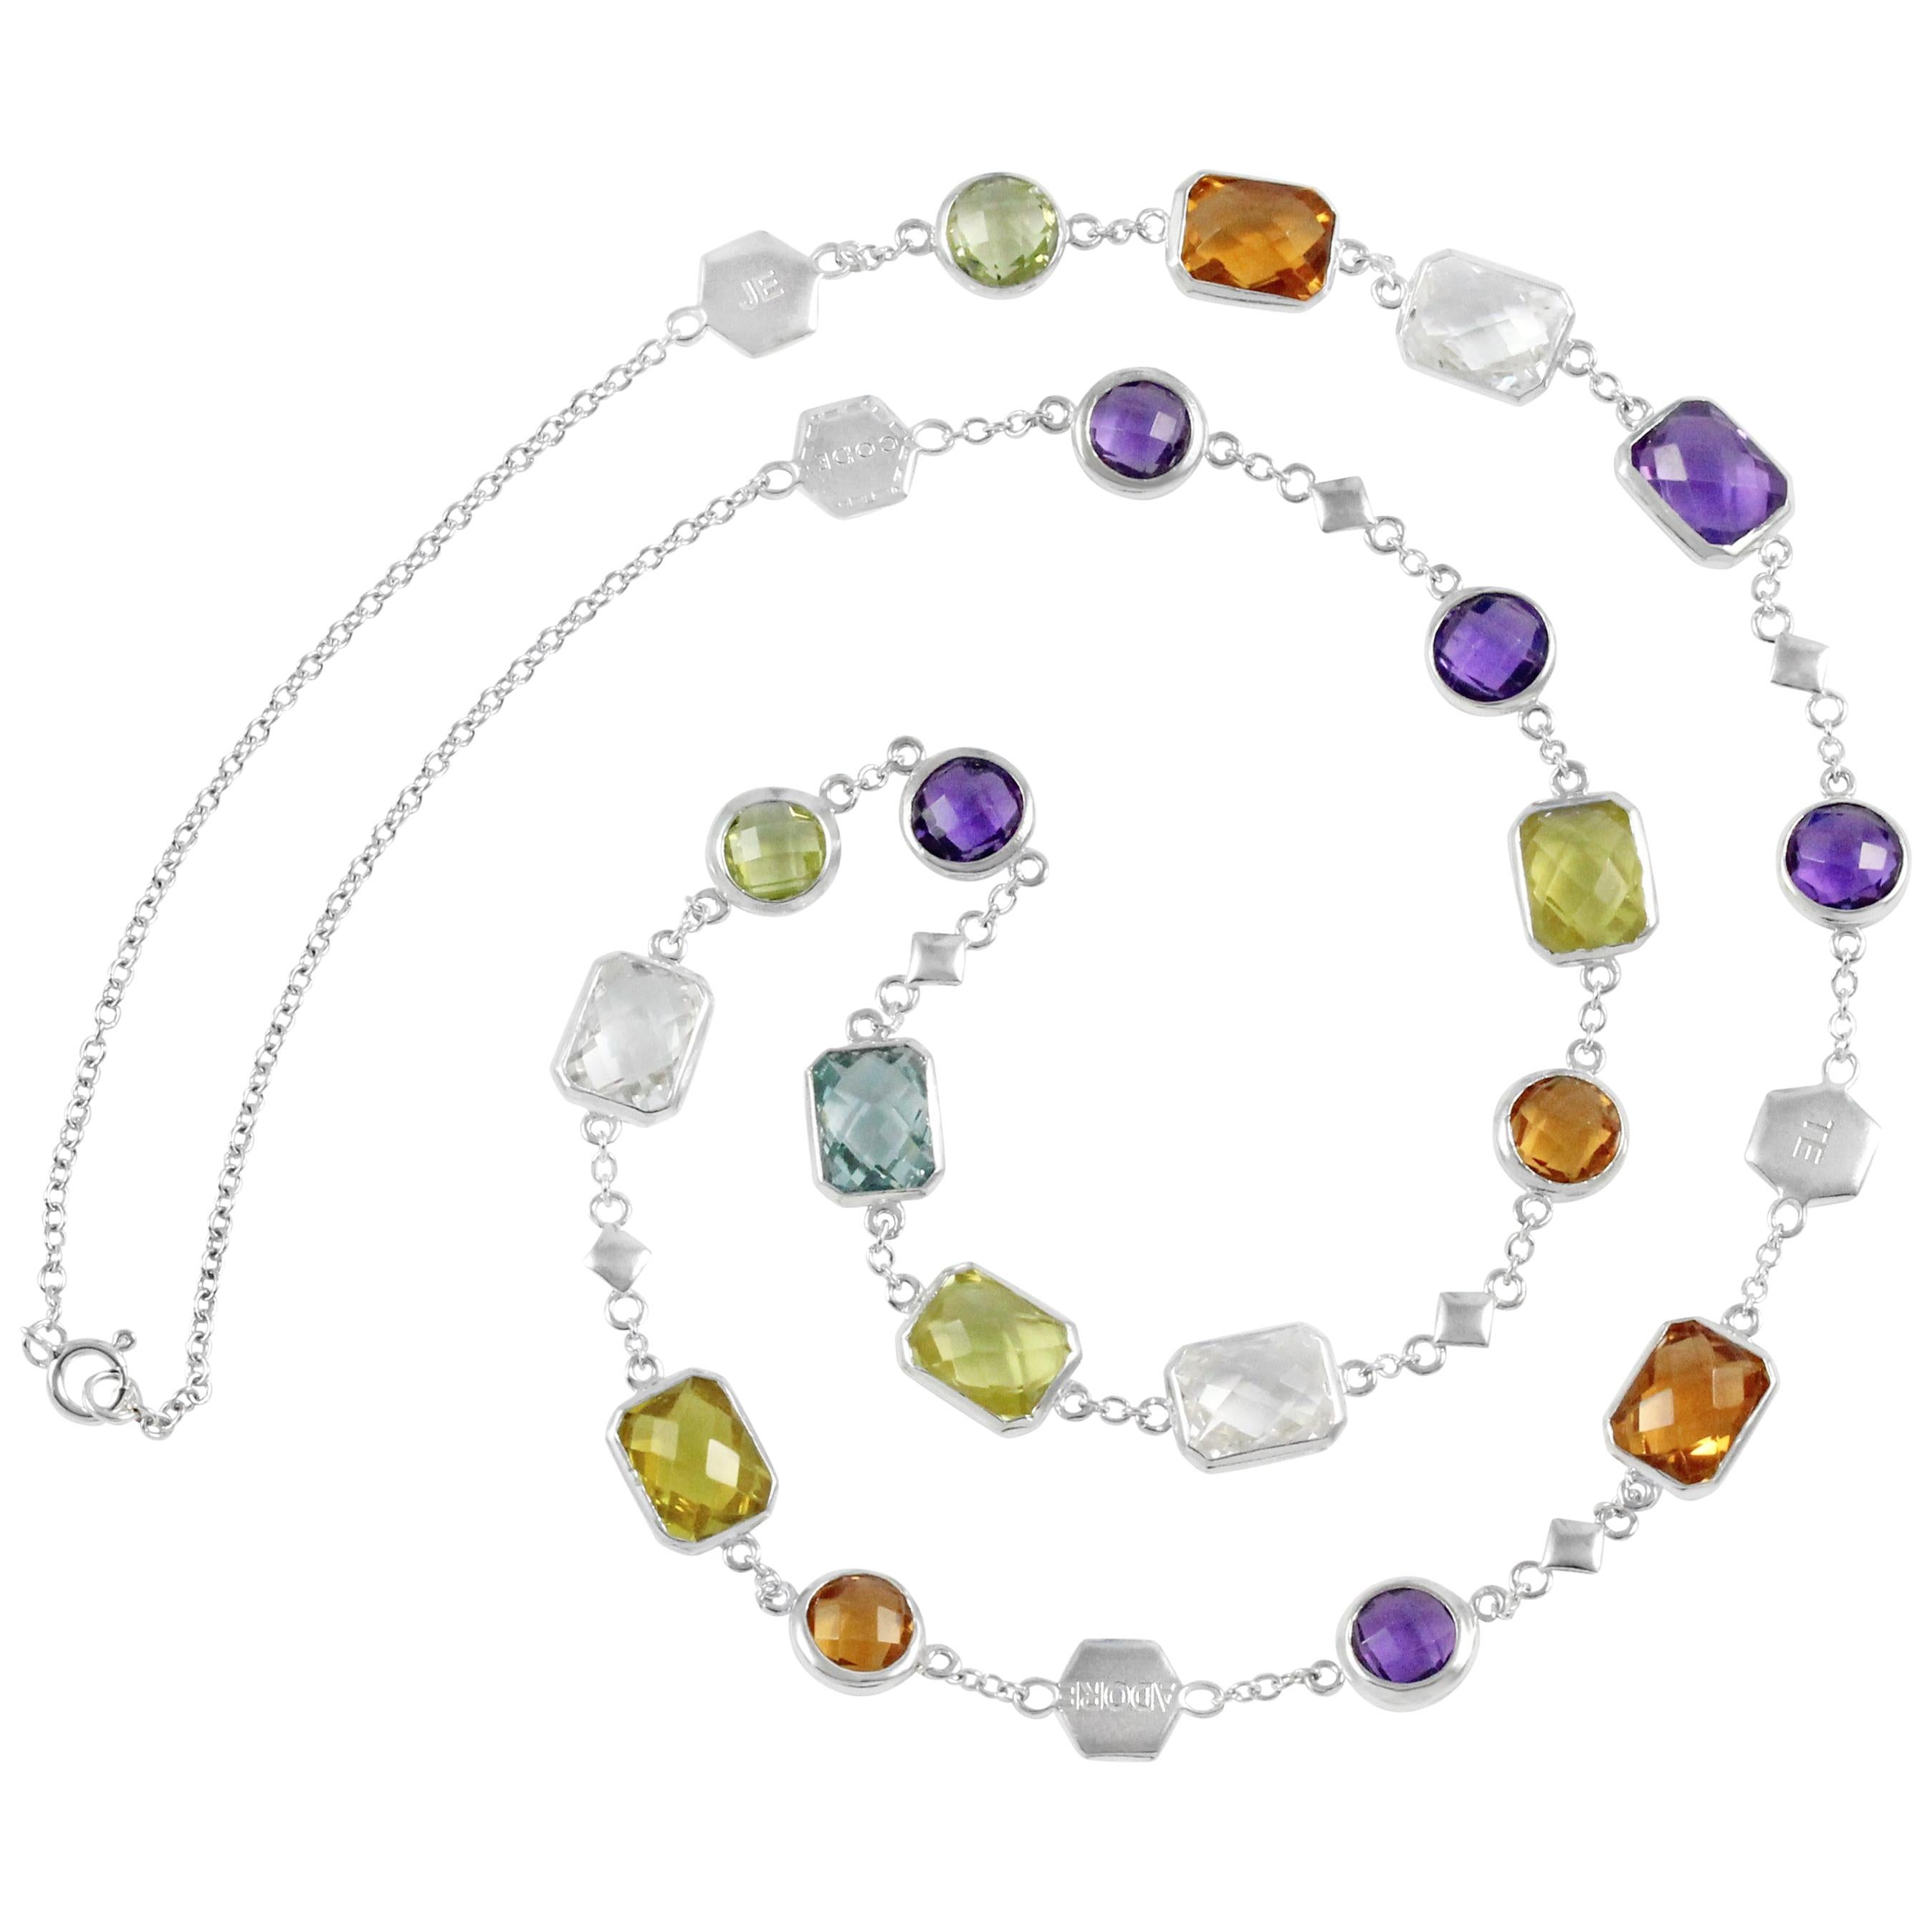 Customizable Code By Edge Multi-Gem Necklace "Je T'Adore" Written in Morse Code  For Sale